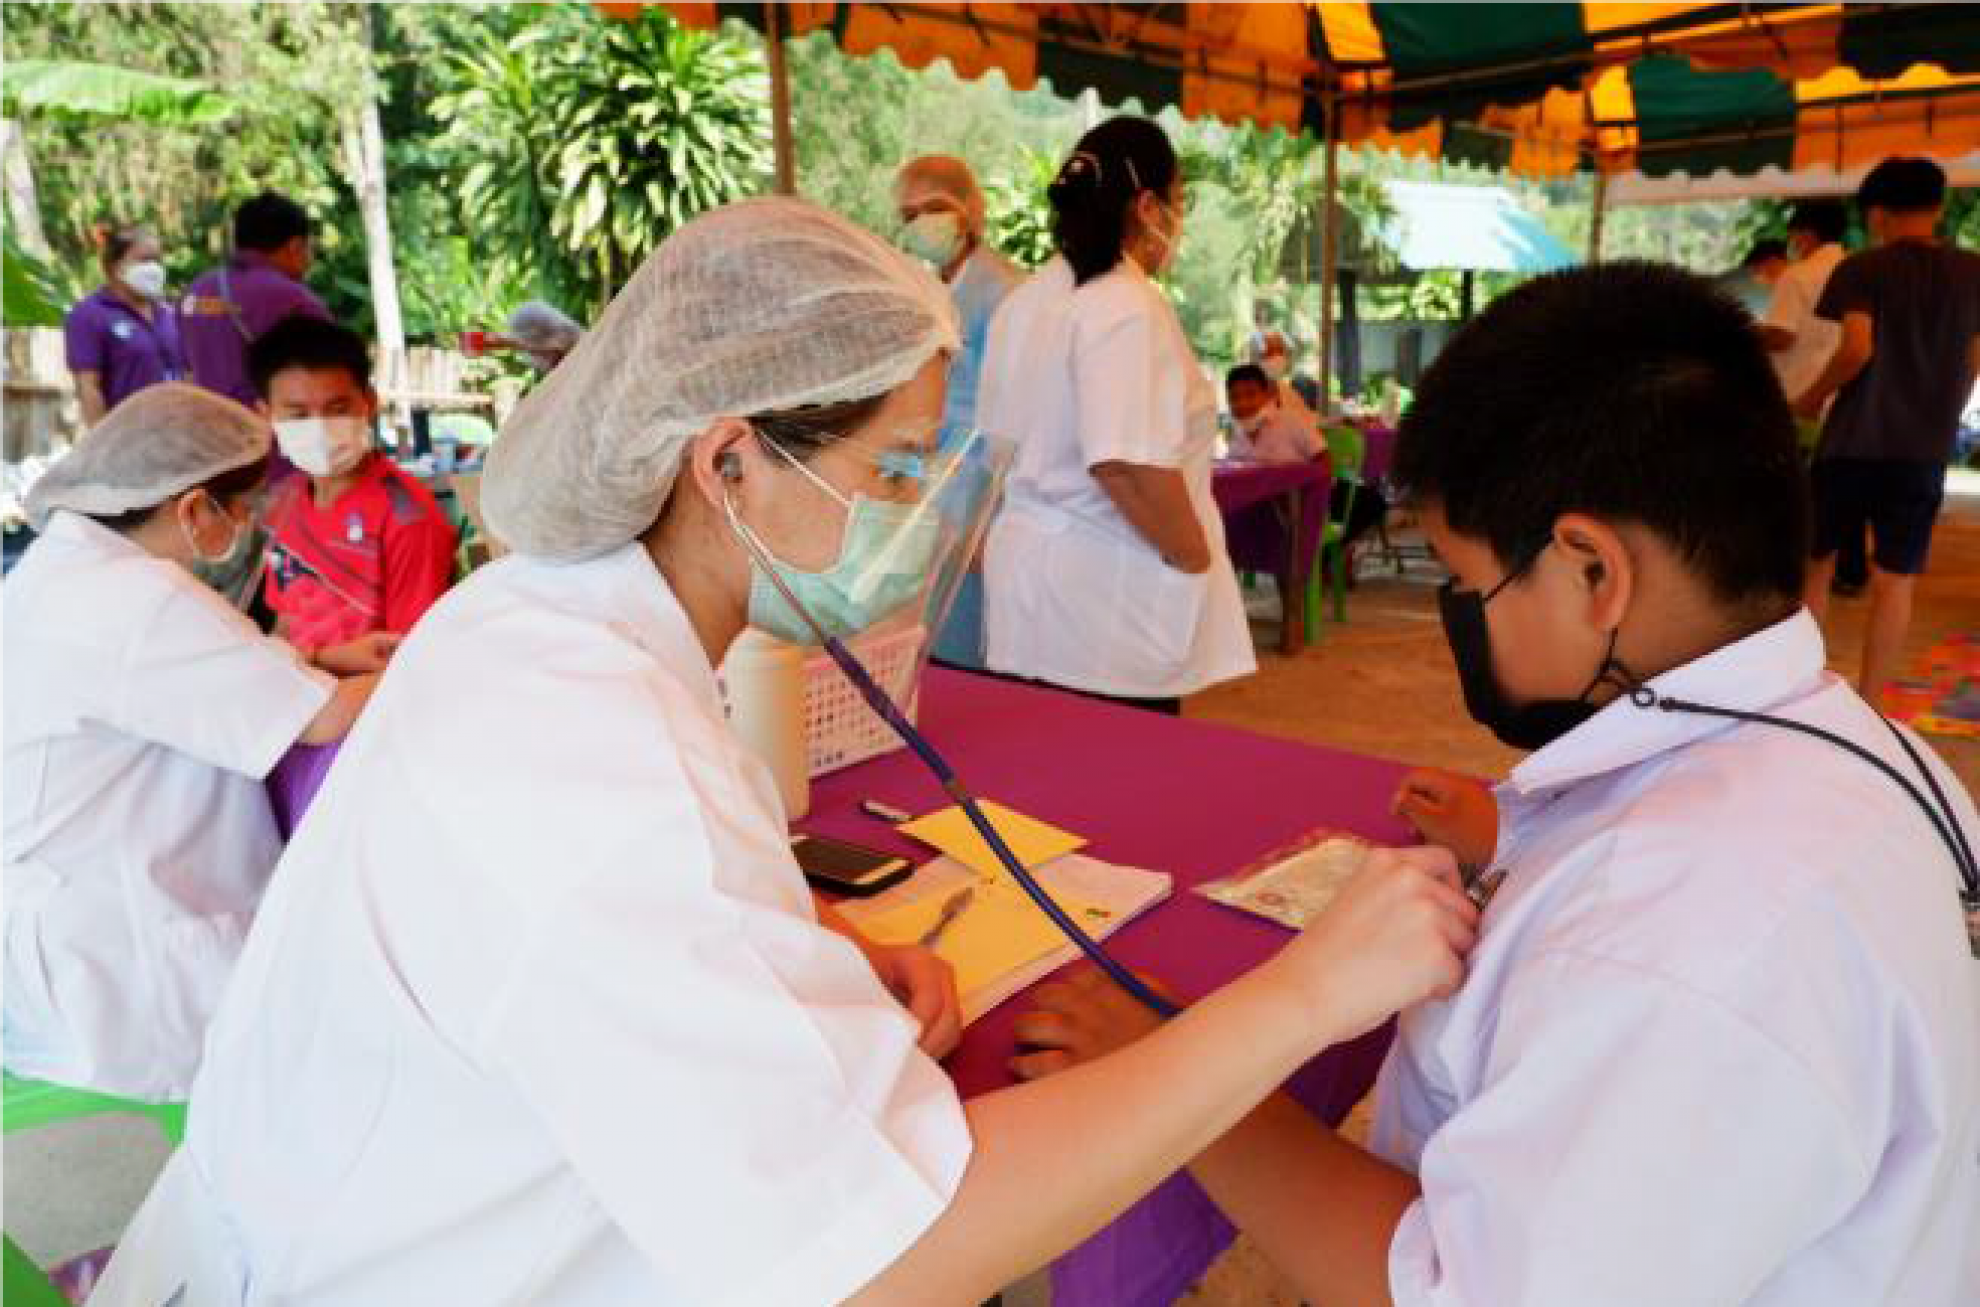 Doctors provided the physical examination for students and local people.